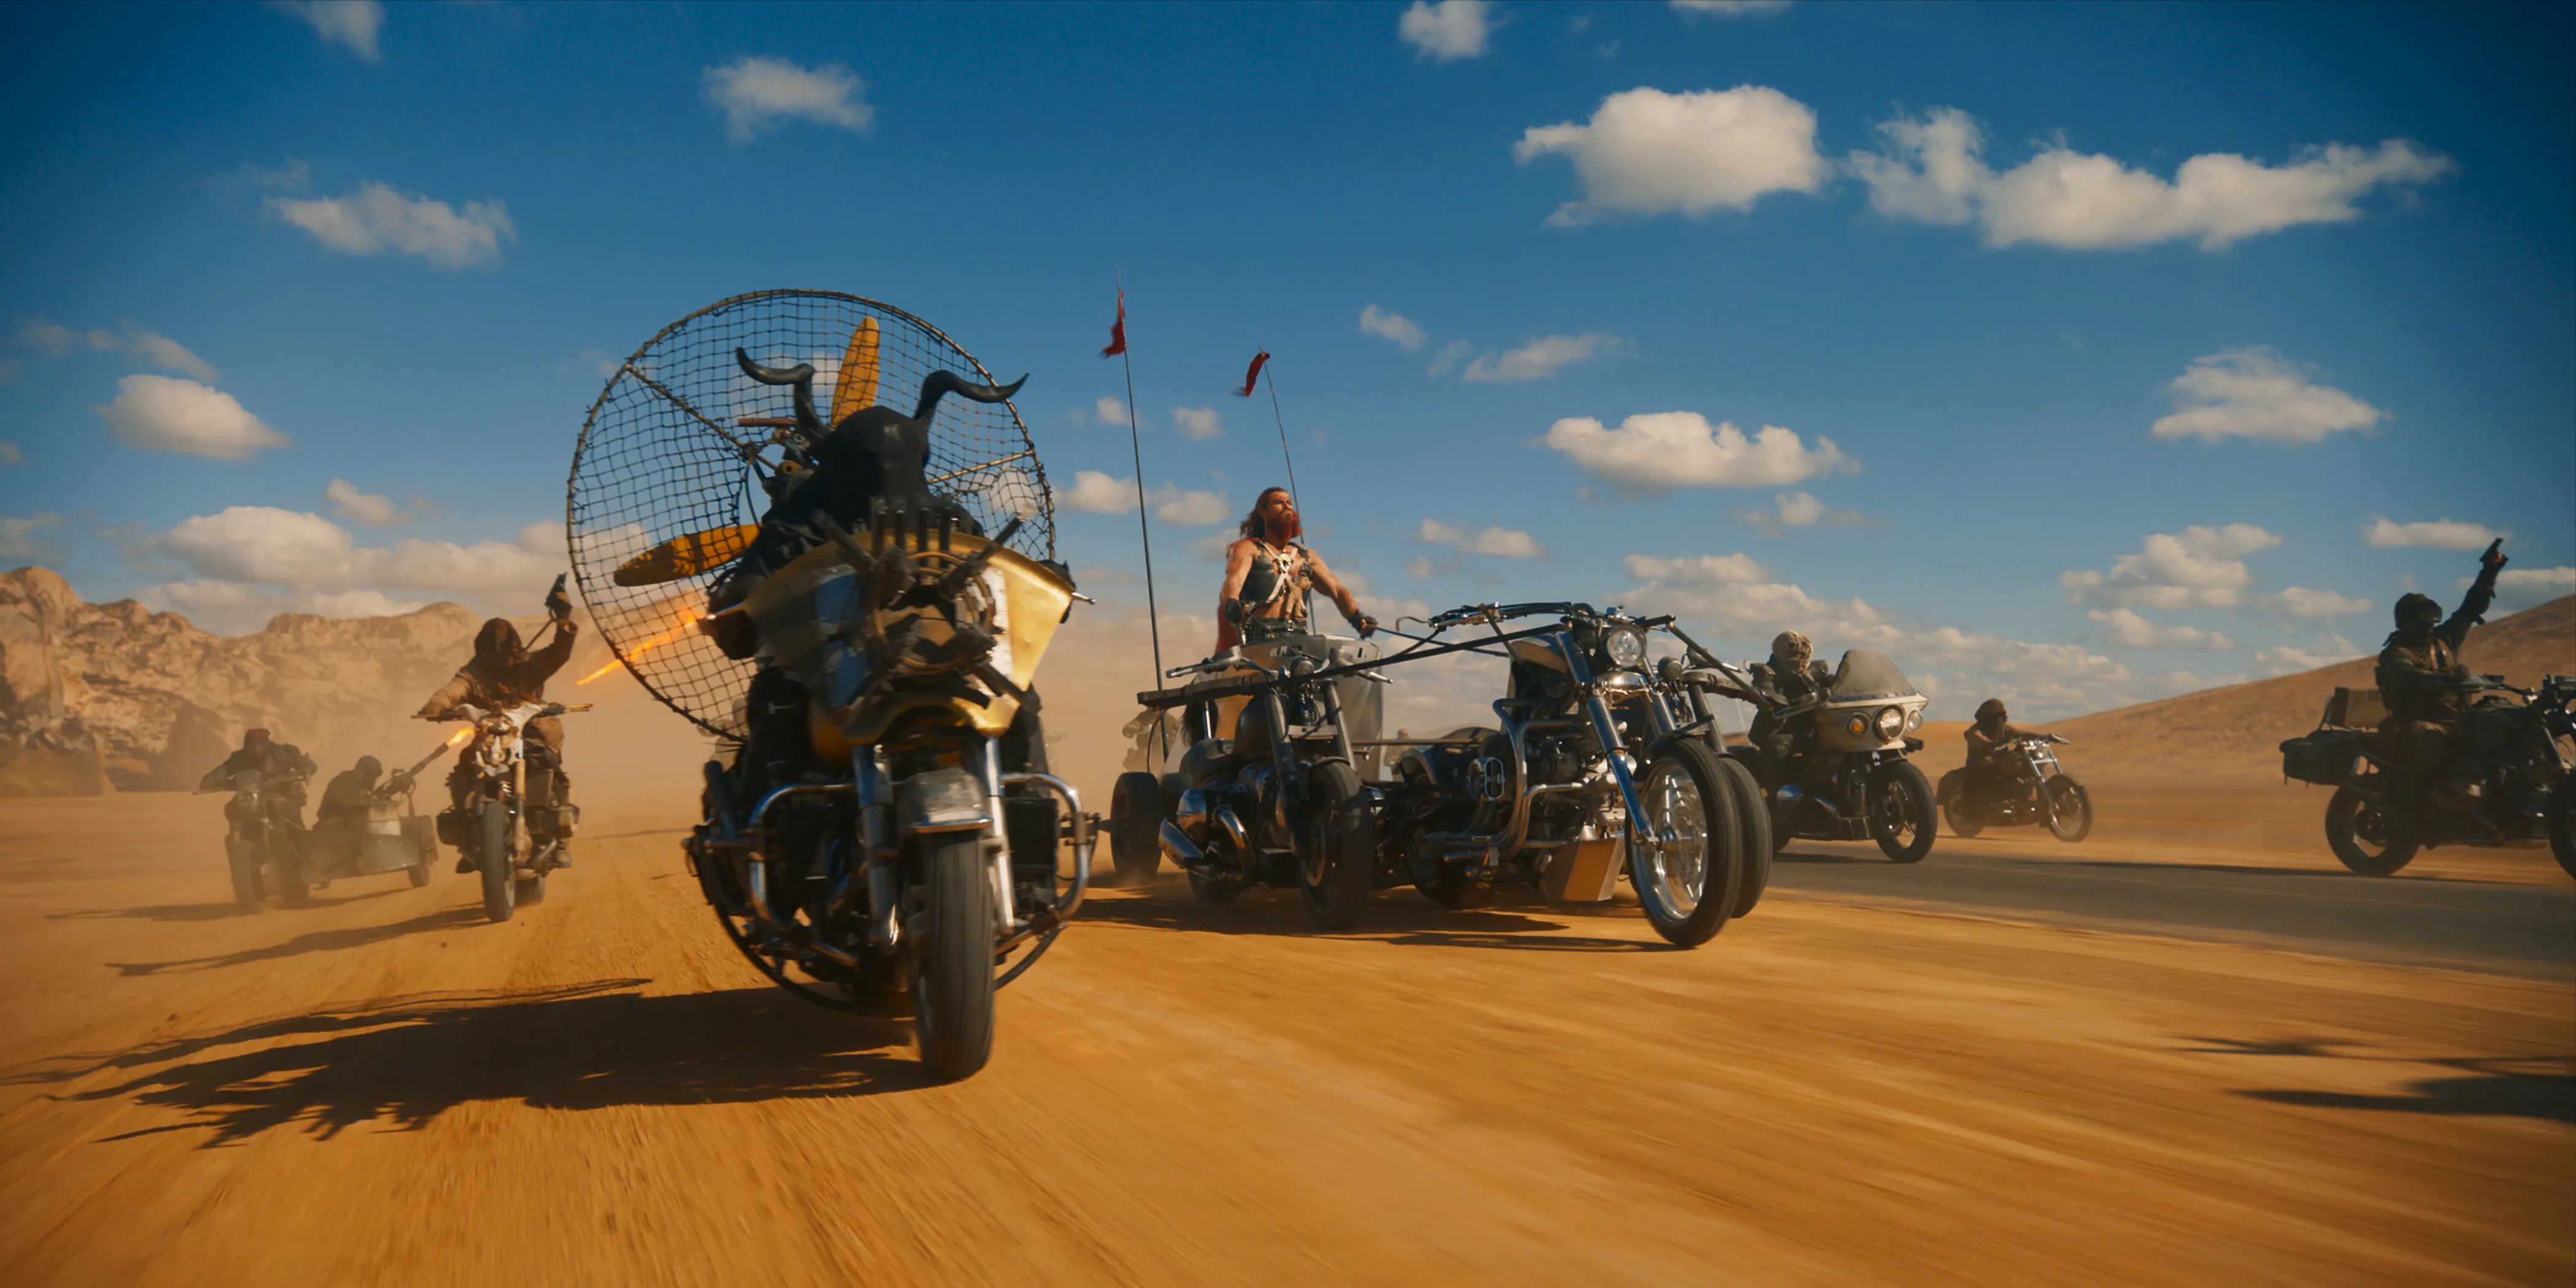 The Octoboss and Dementus travel with their riders through the Wasteland in George Miller's 'Furiosa'